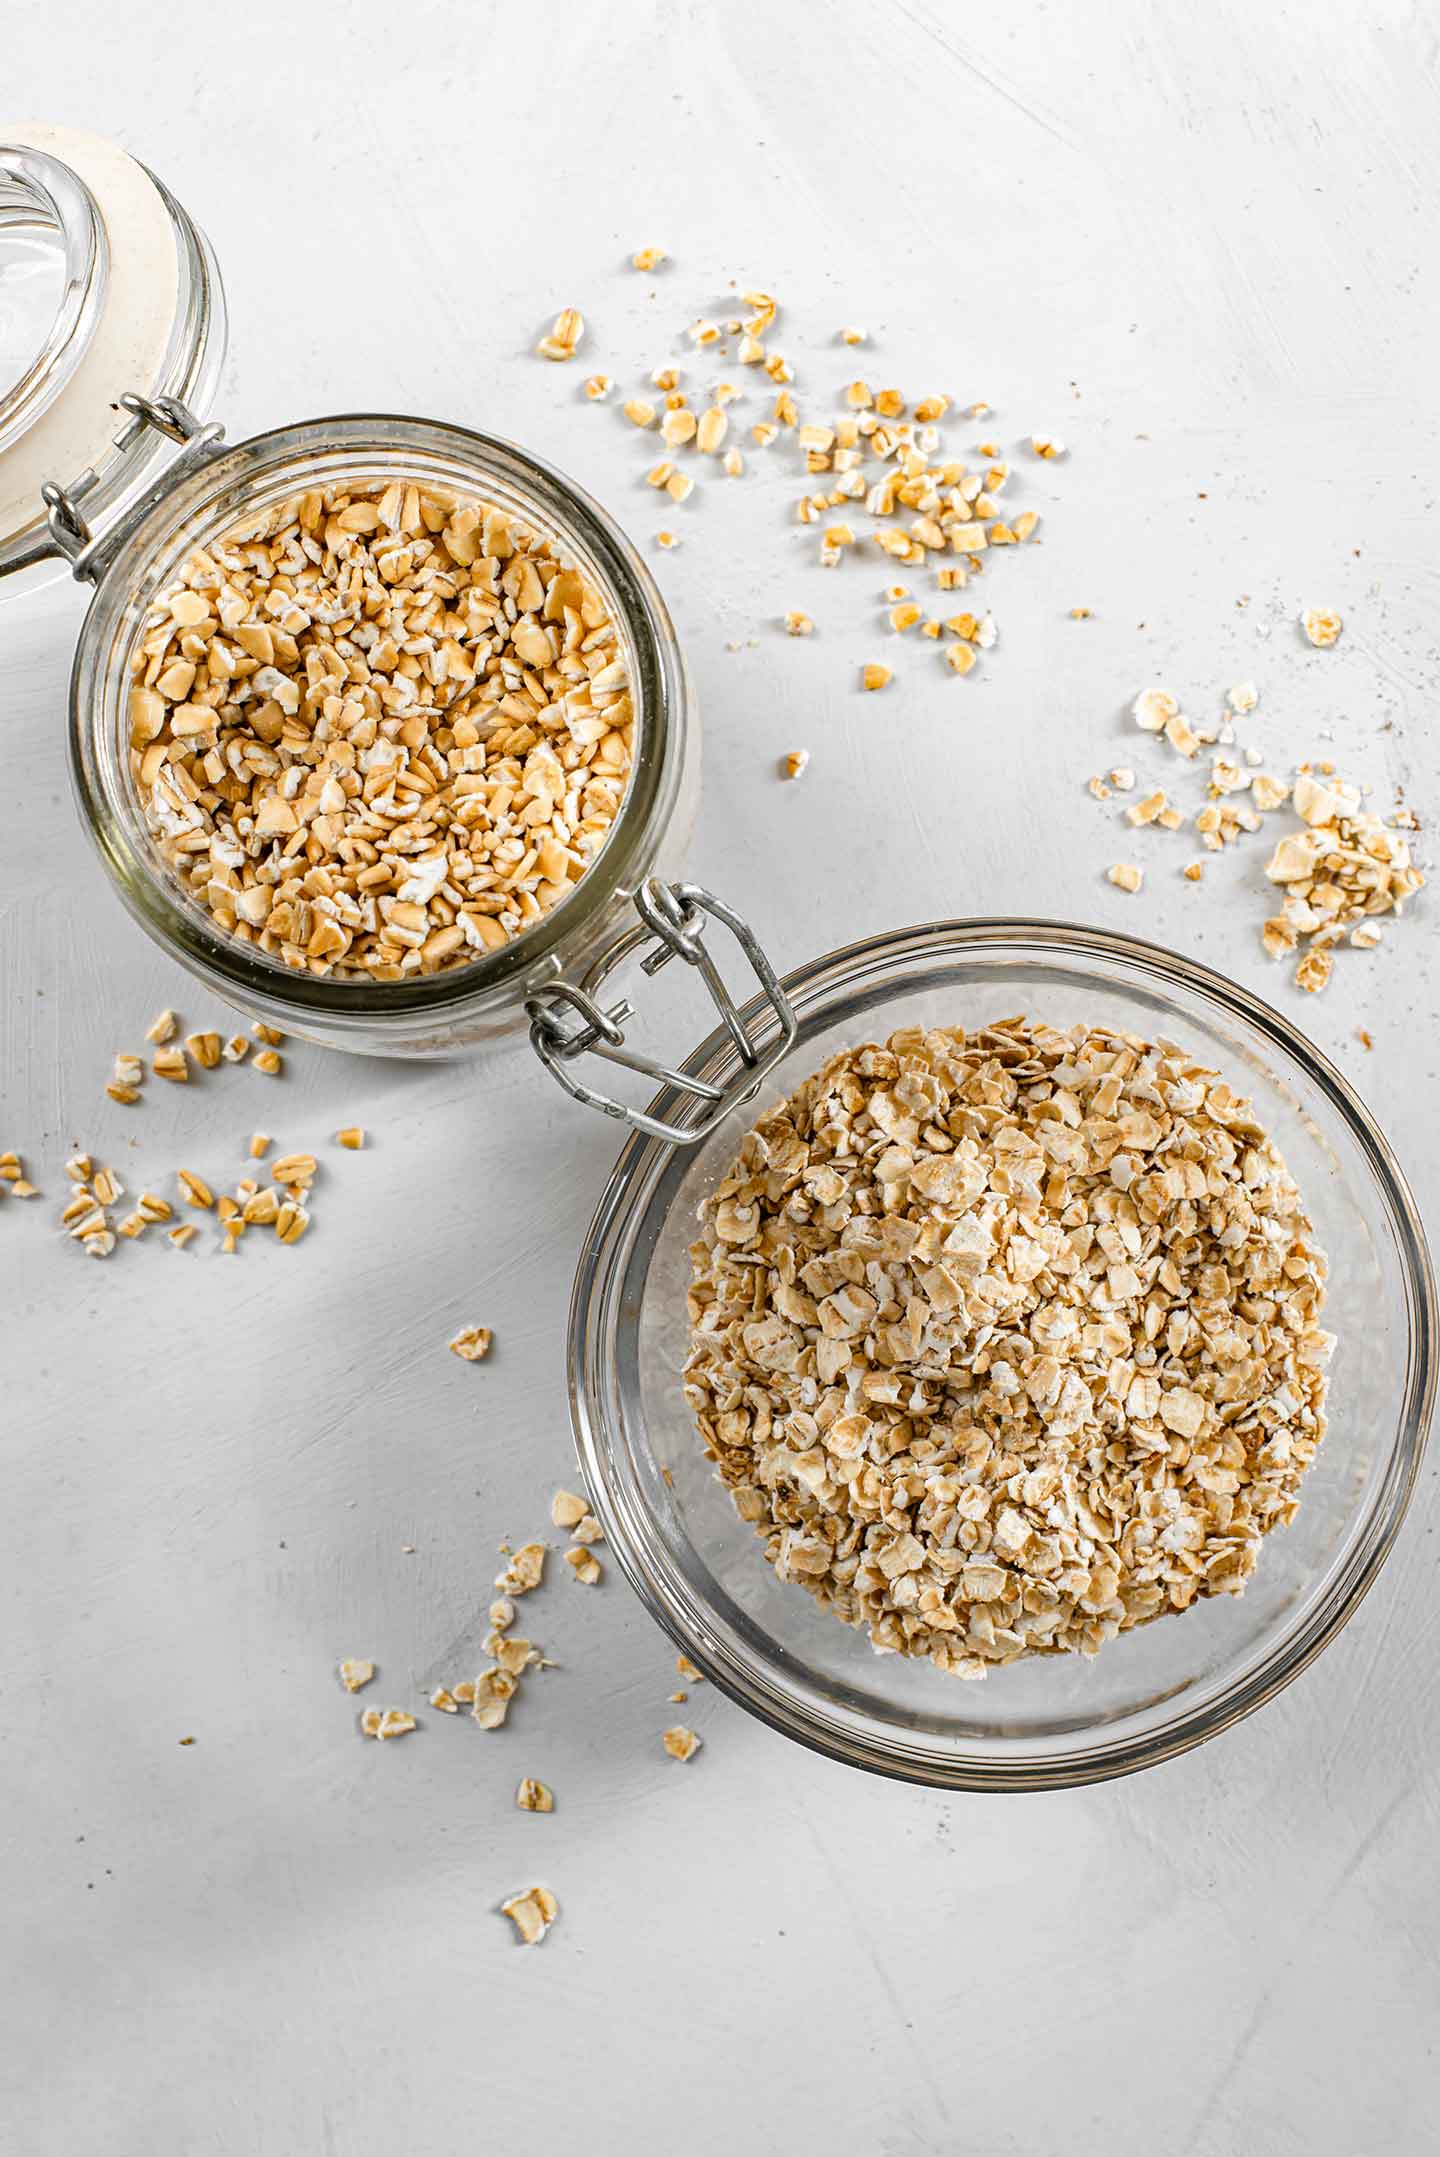 Top down view of steel cut oats in a jar and quick cooking oats in a small glass bowl